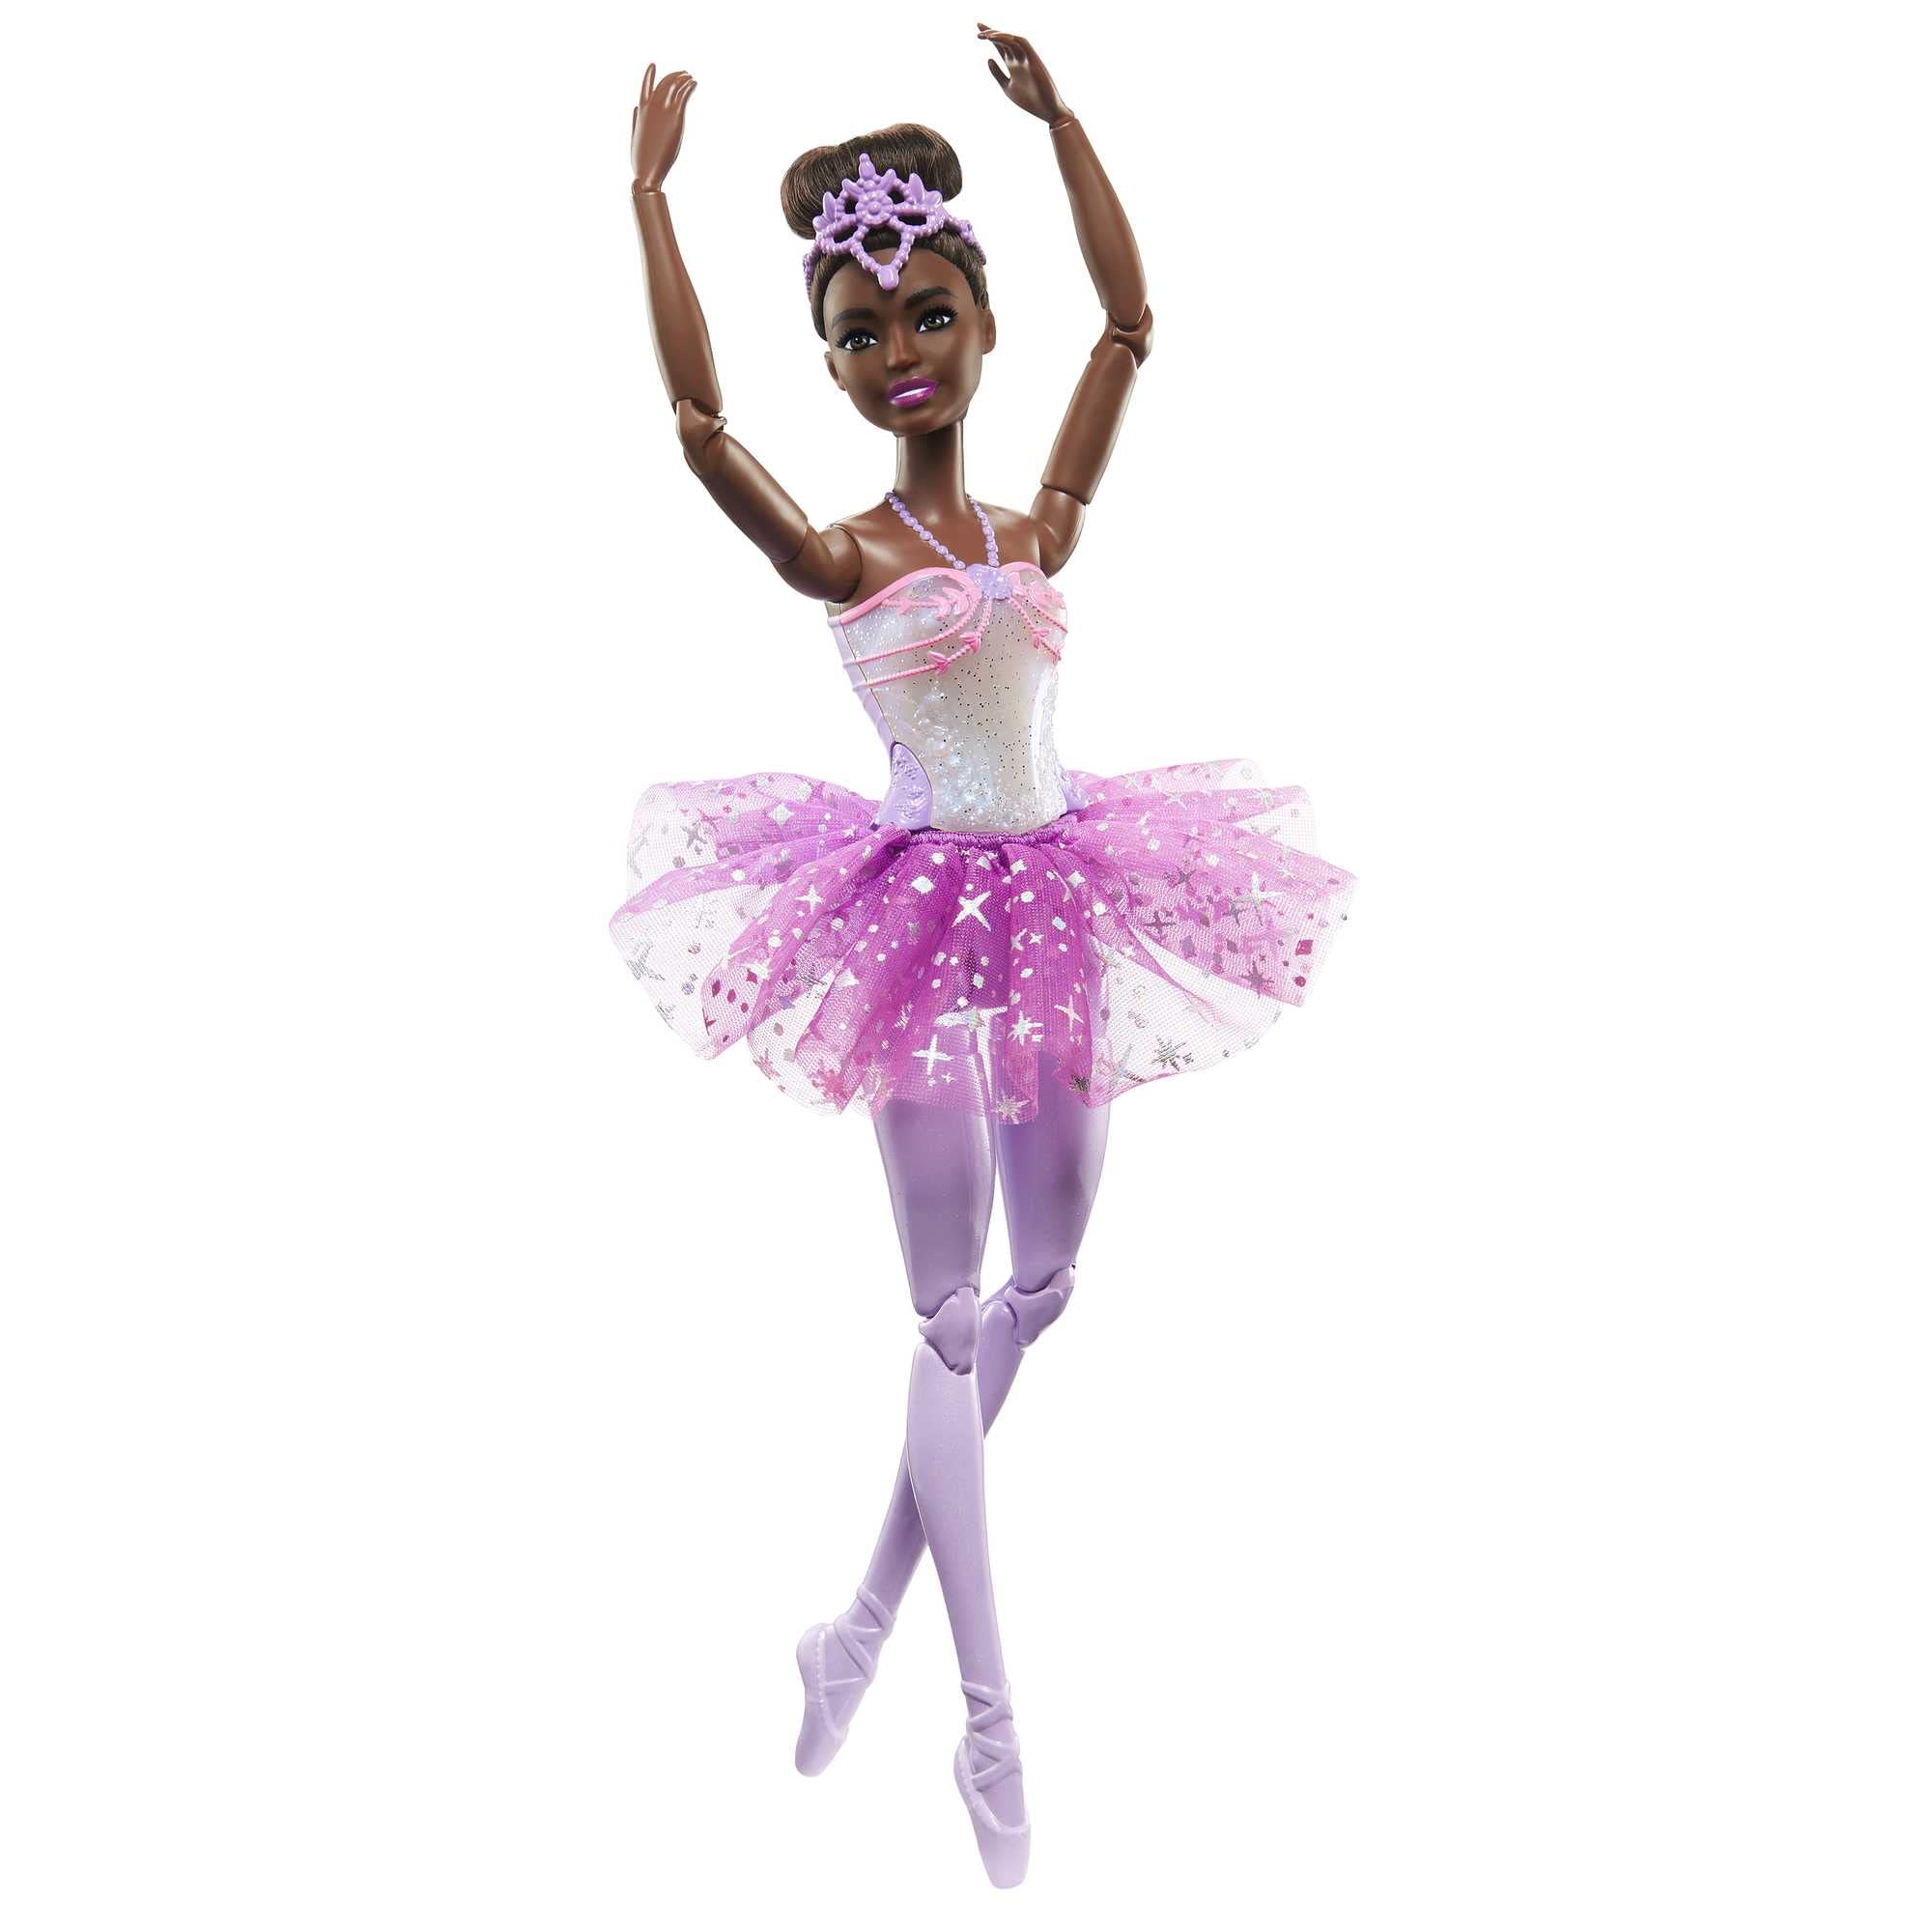 Barbie Dreamtopia Doll, Twinkle Lights Posable Ballerina with 5 Light-Up Shows, Sparkly Purple Tutu, Black Hair & Tiara